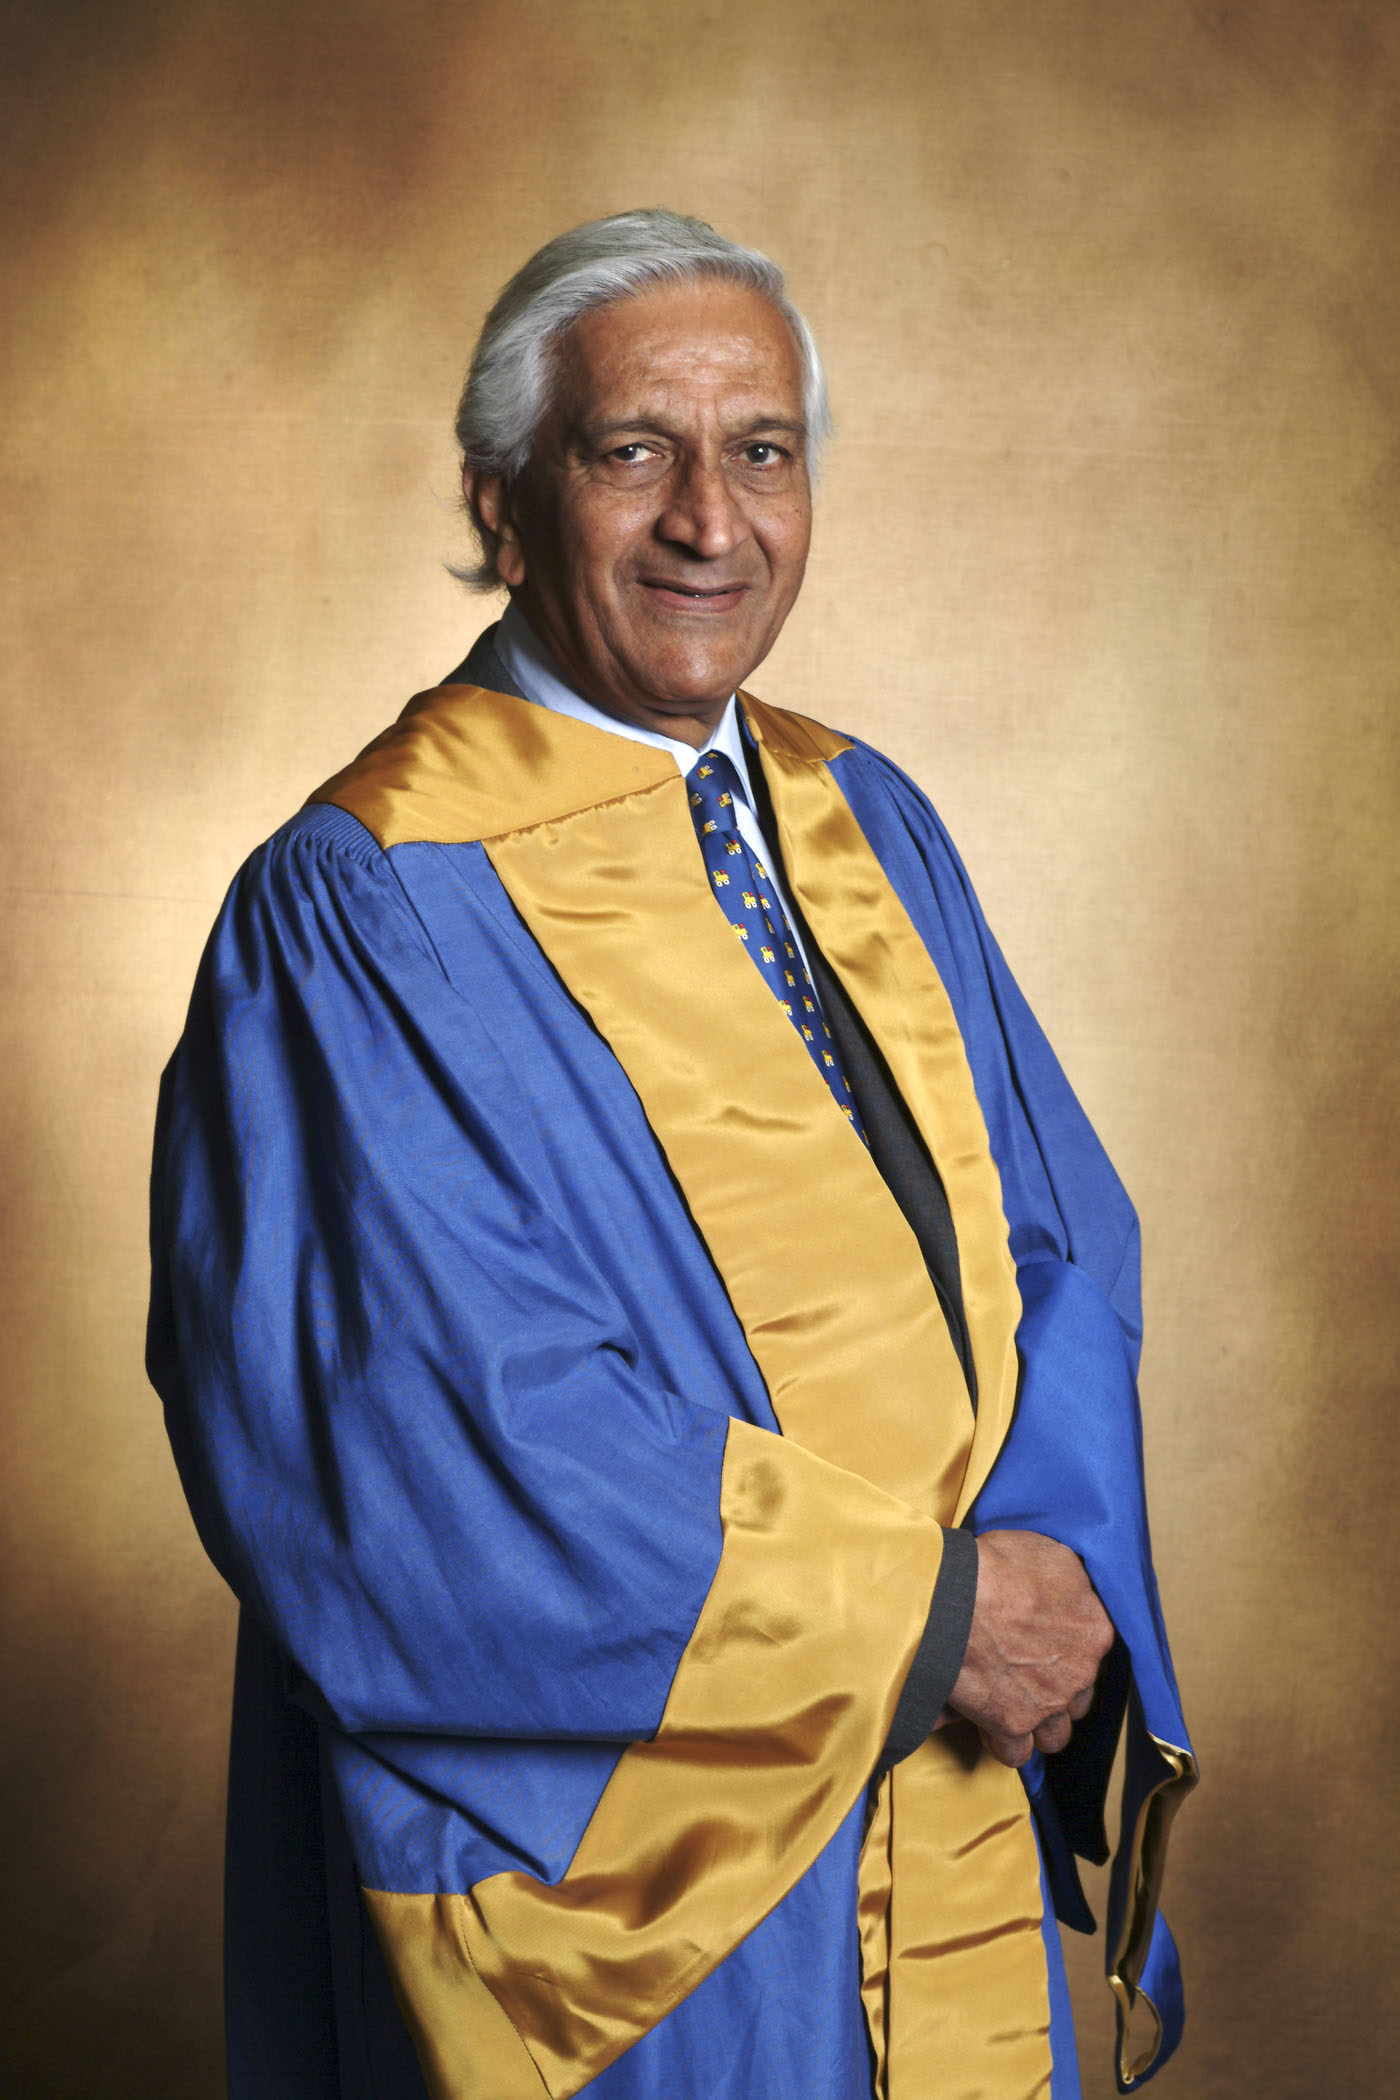 a photo of the Lord Patel, the new chancellor